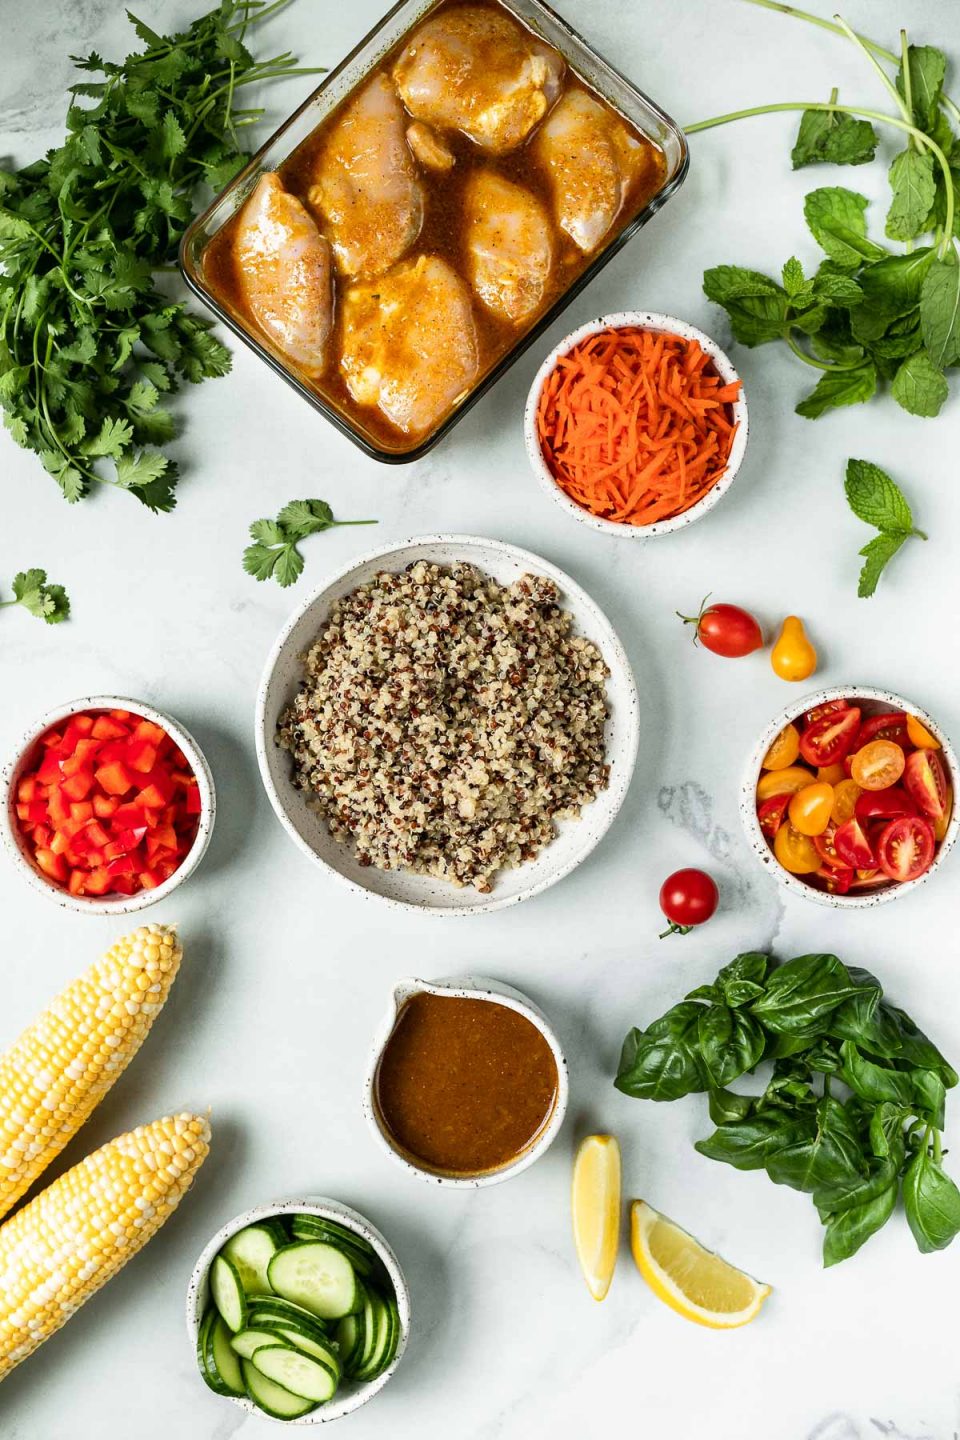 Glow bowls components arranged on a white marble surface: marinated chicken thighs, grated carrot, quinoa, diced bell pepper, cucumber, corn, & fresh herbs (cilantro, mint & basil).